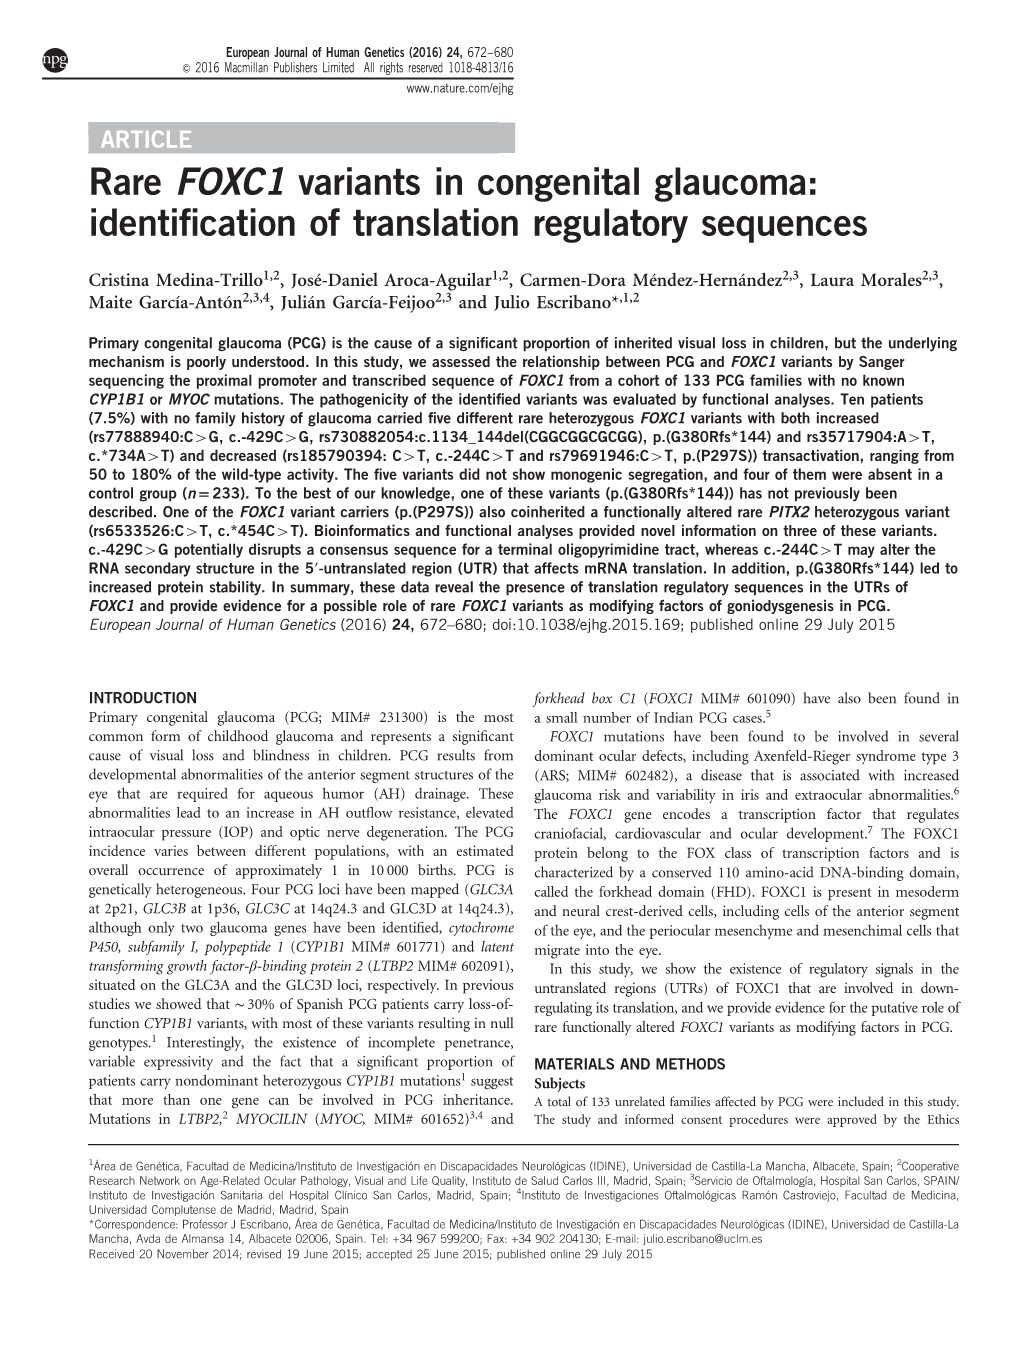 Rare FOXC1 Variants in Congenital Glaucoma: Identiﬁcation of Translation Regulatory Sequences